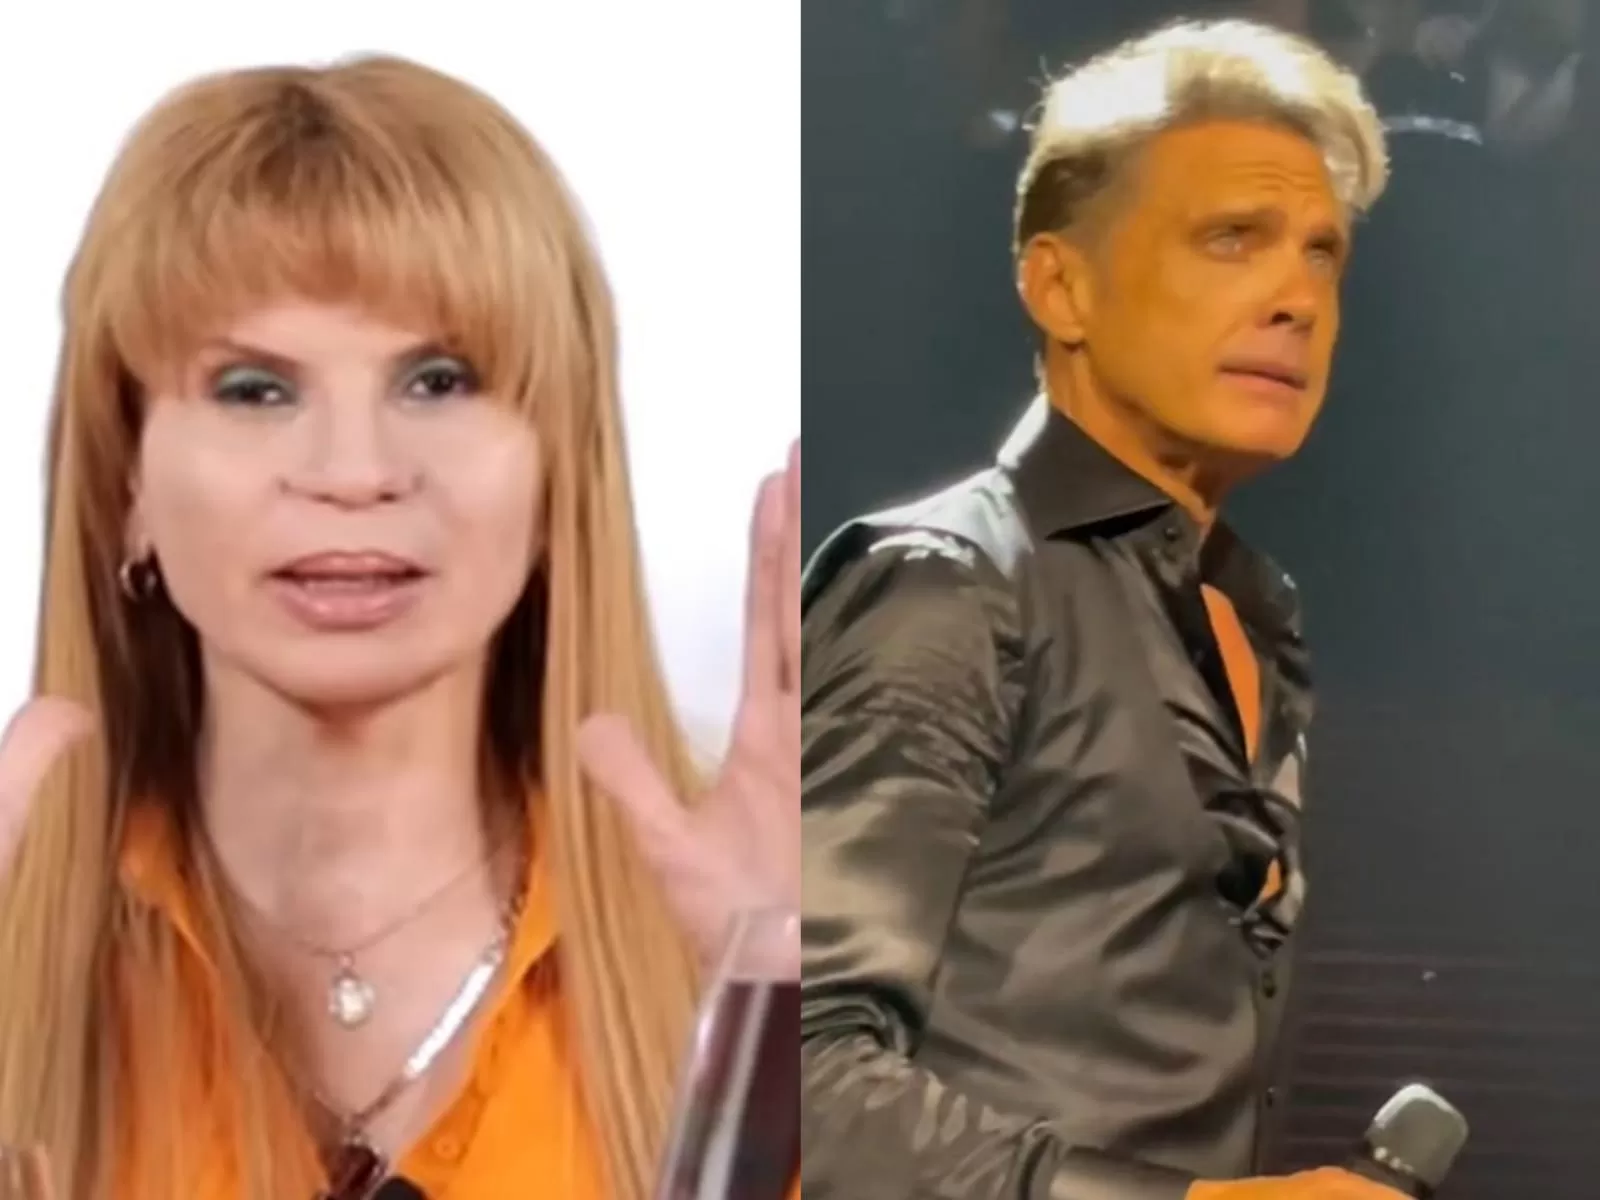 Mhoni Vidente gives worrying predictions about Luis Miguel's health: "he gets sick"
